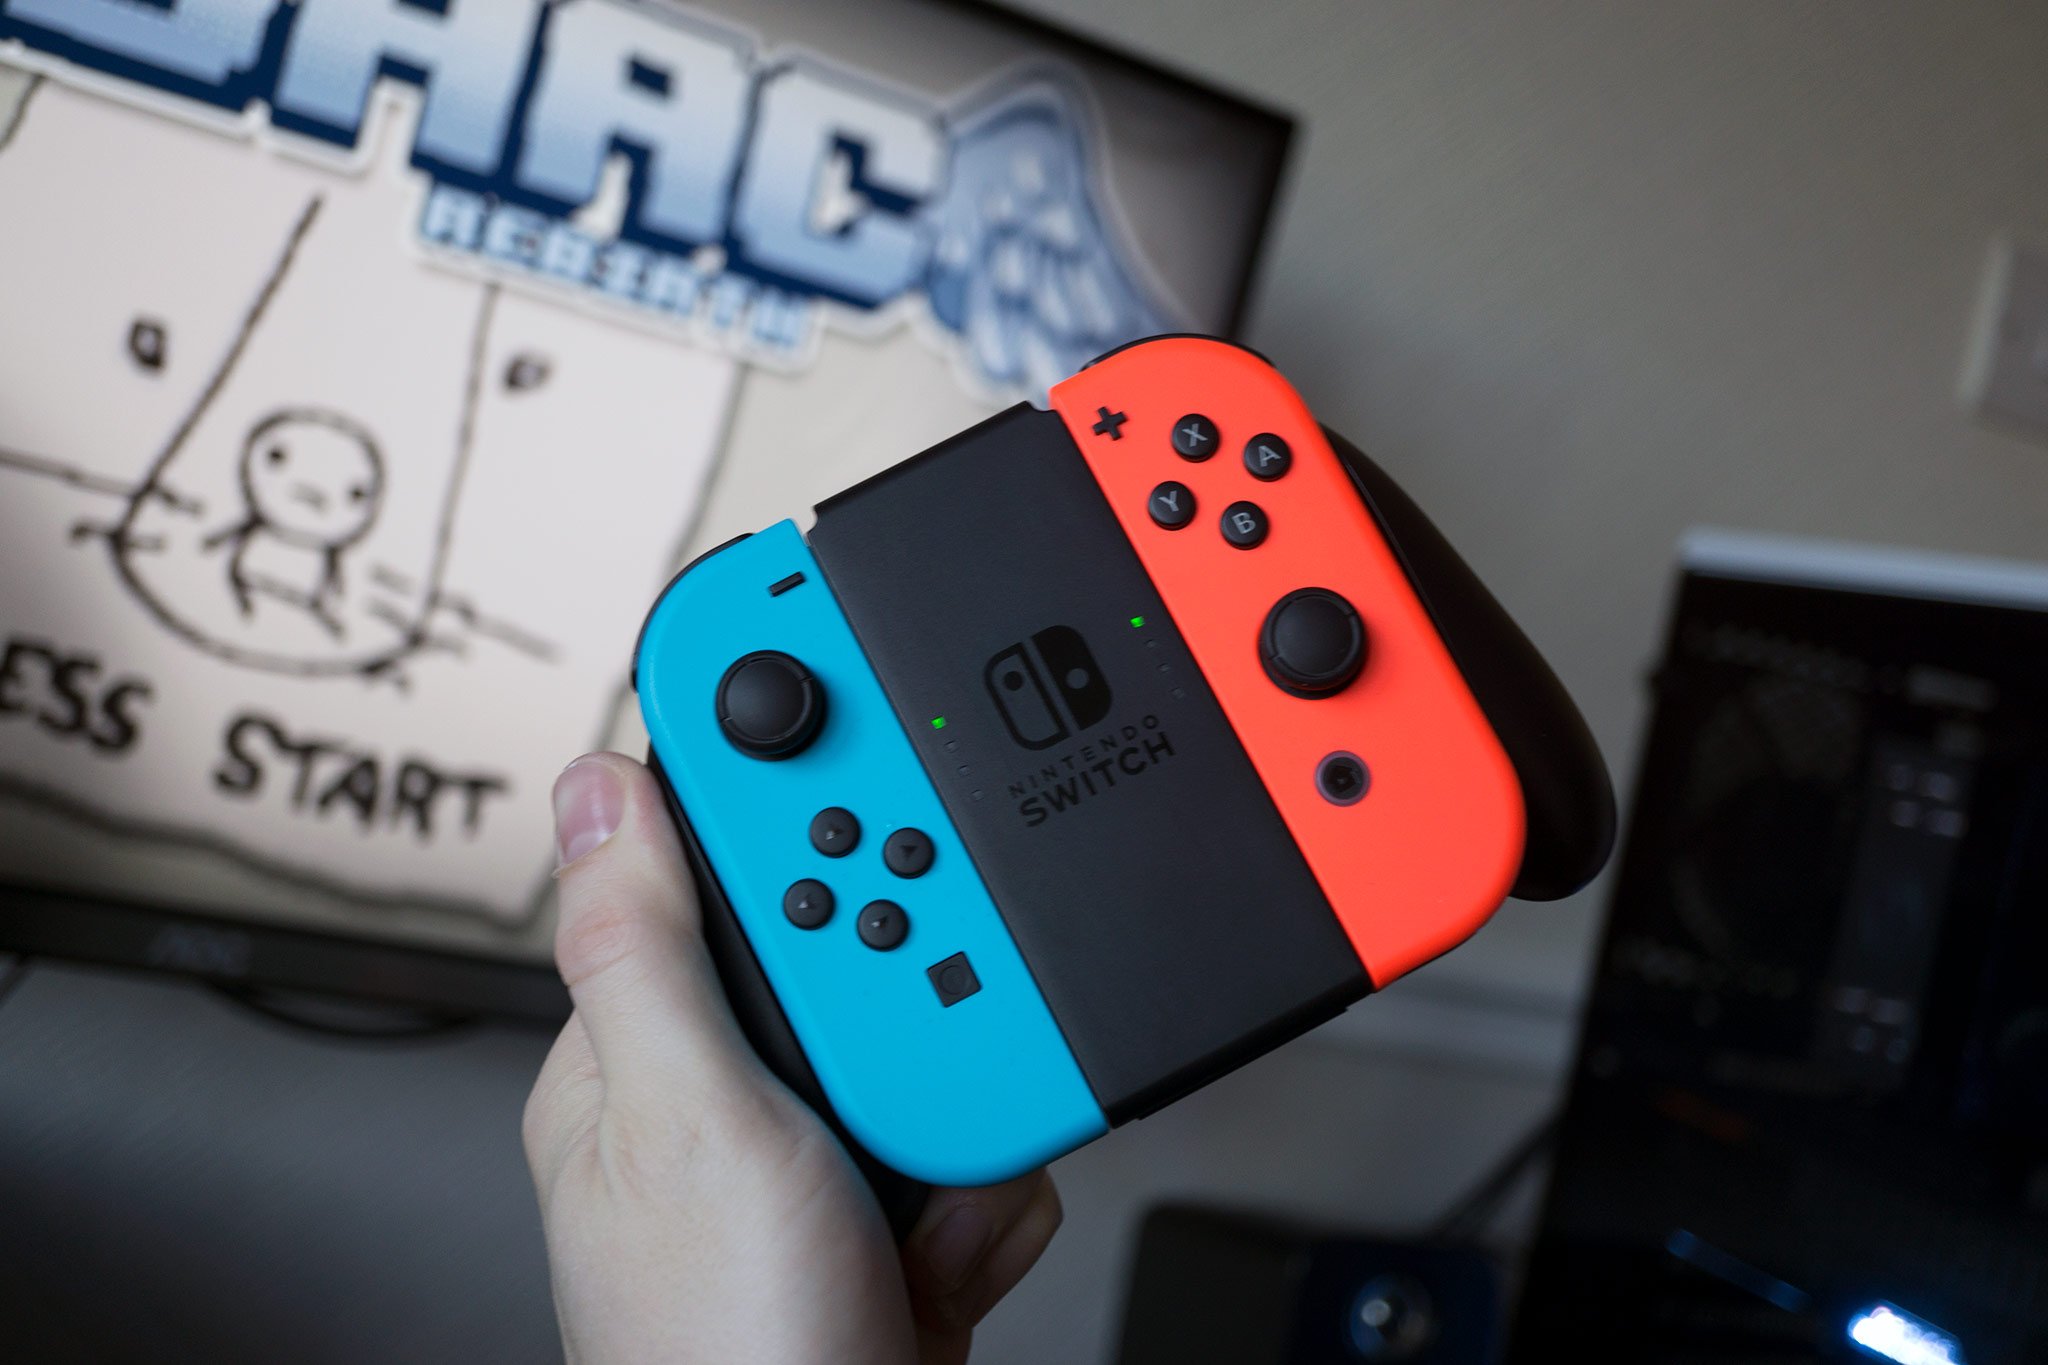 Steam finally adds support for Nintendo Joy-Con controllers